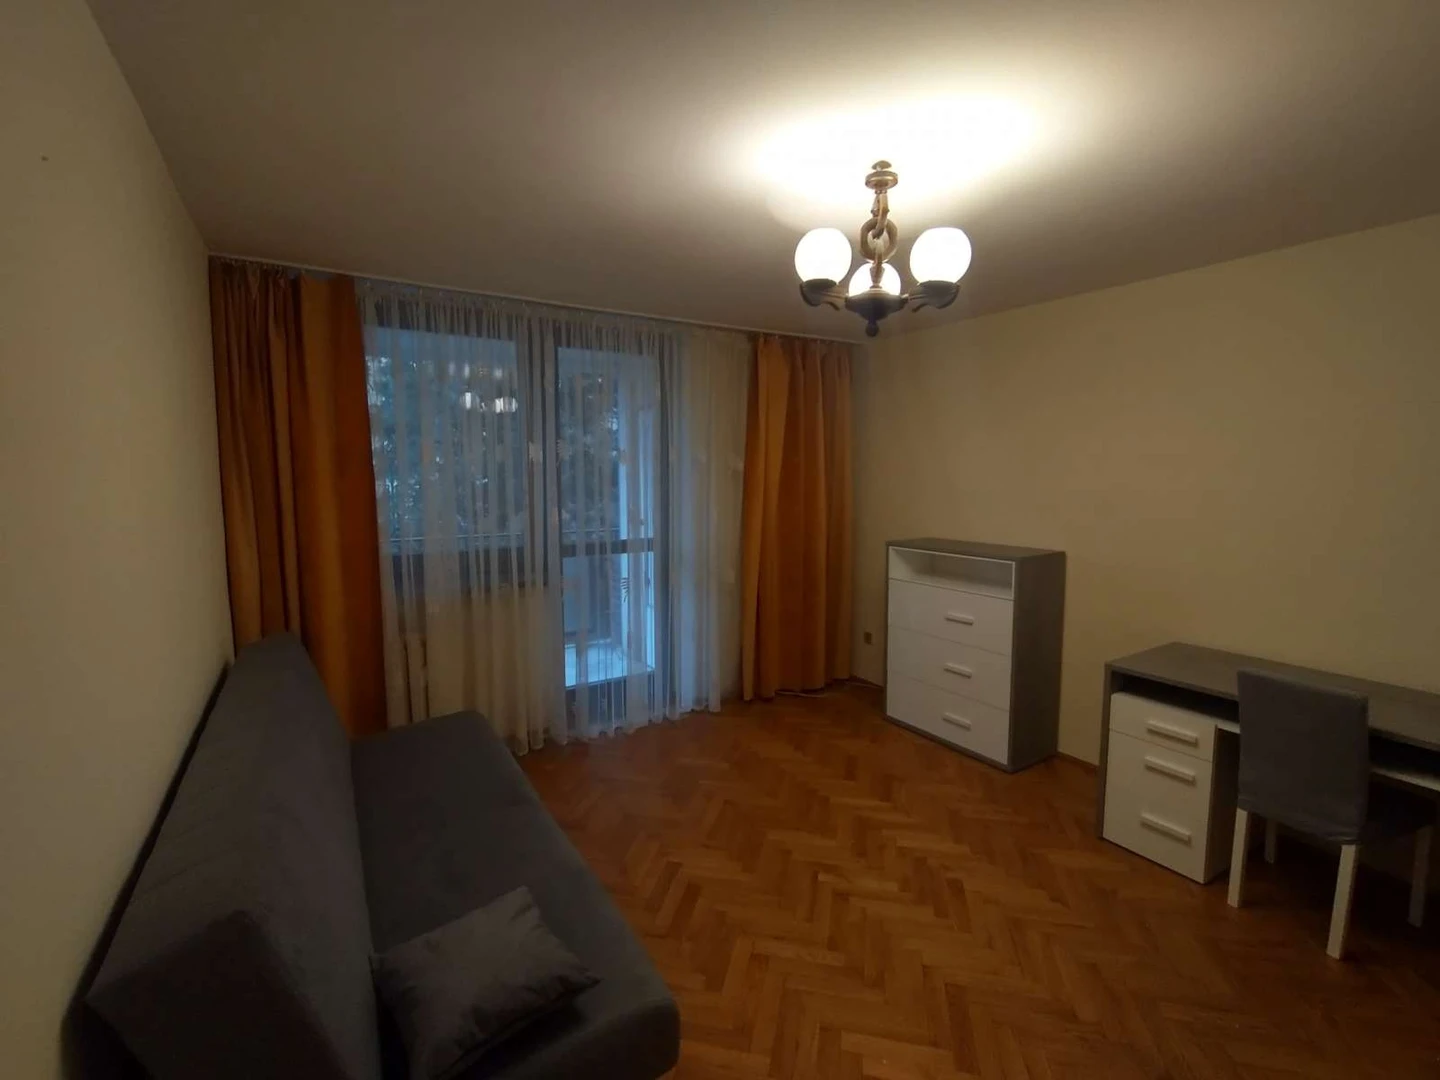 Room for rent in a shared flat in lublin